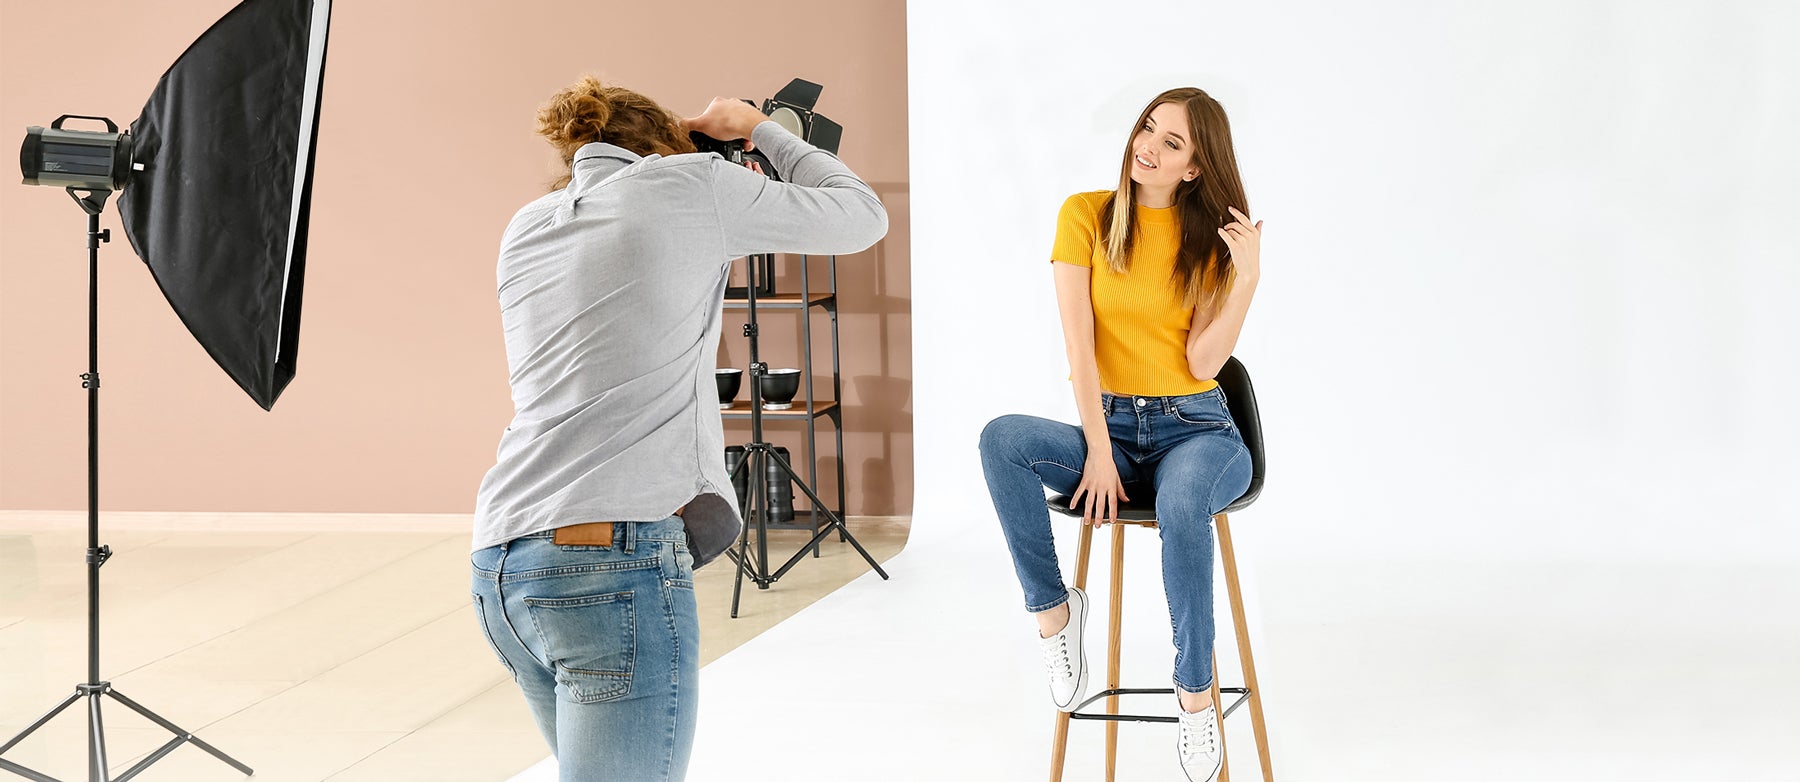 A photographer takes a portrait of a woman wearing a yellow sweater and blue jeans. She is sitting on a stool in front of a white background. There is a strobe with a softbox to the left of the photographer.